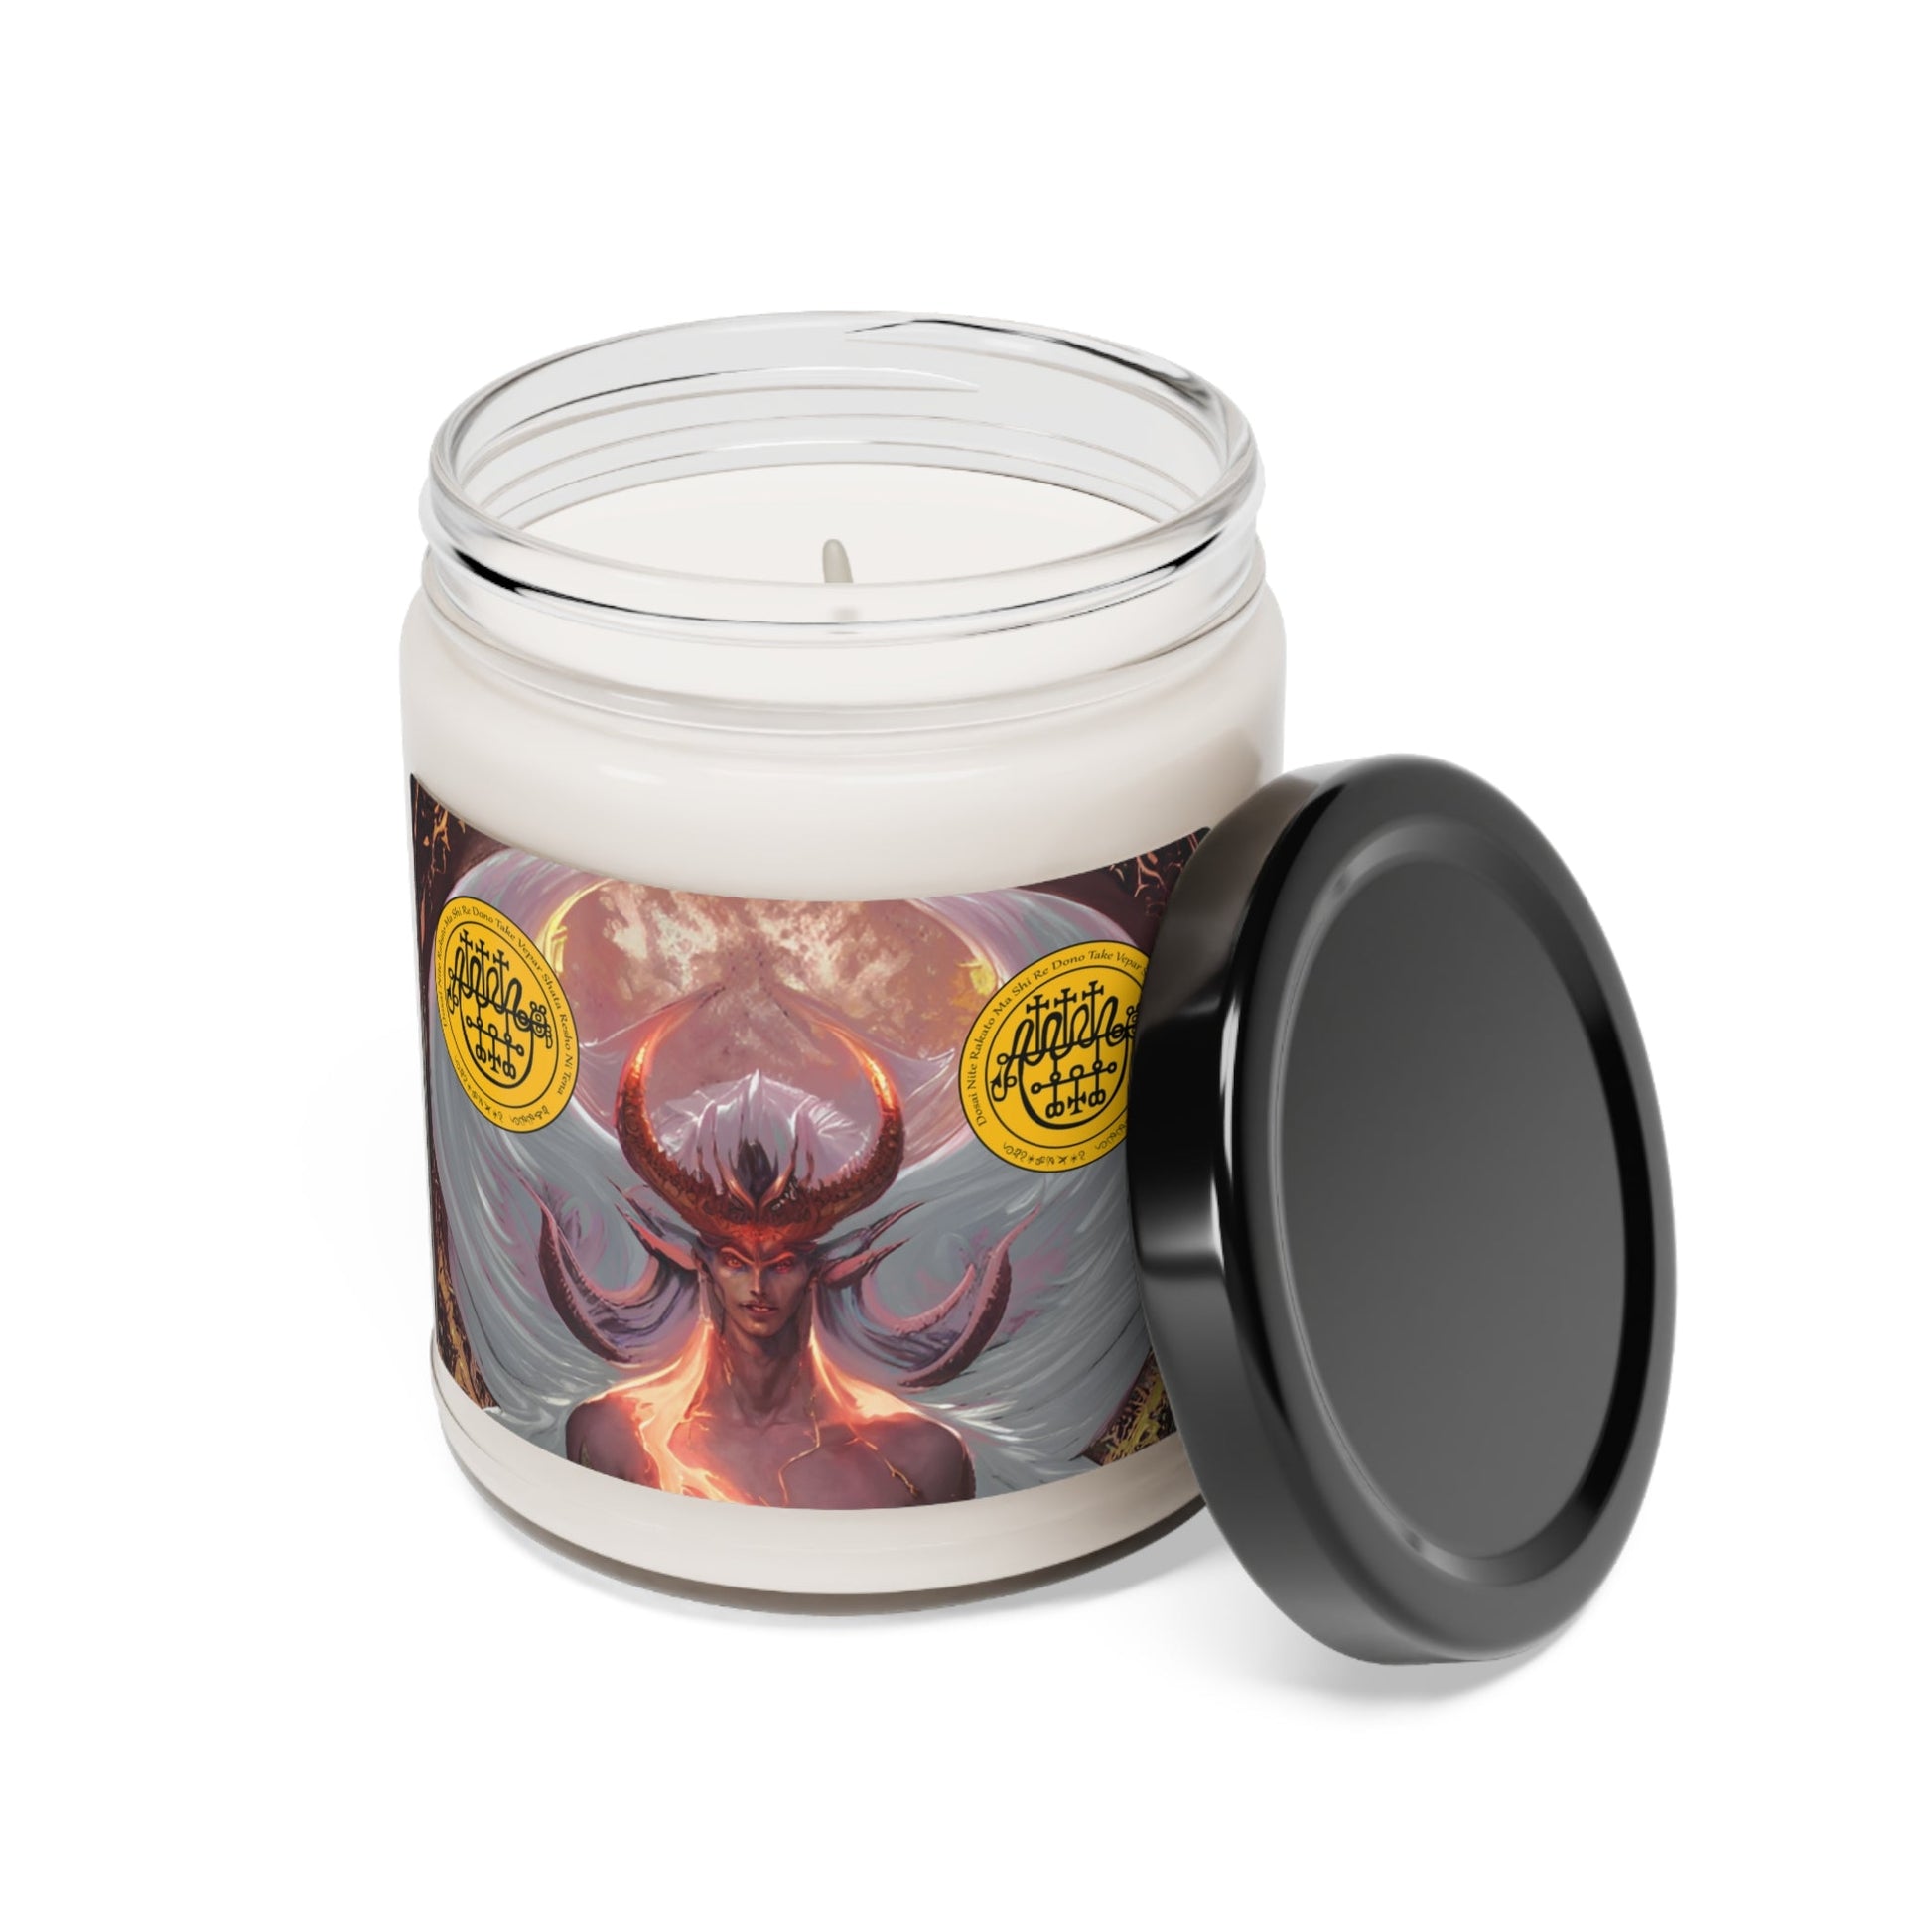 Demon-Vepar-Altar-Scented-Soy-Candle-for-offerings-rituals-initiations-or-praying-and-meditation-17